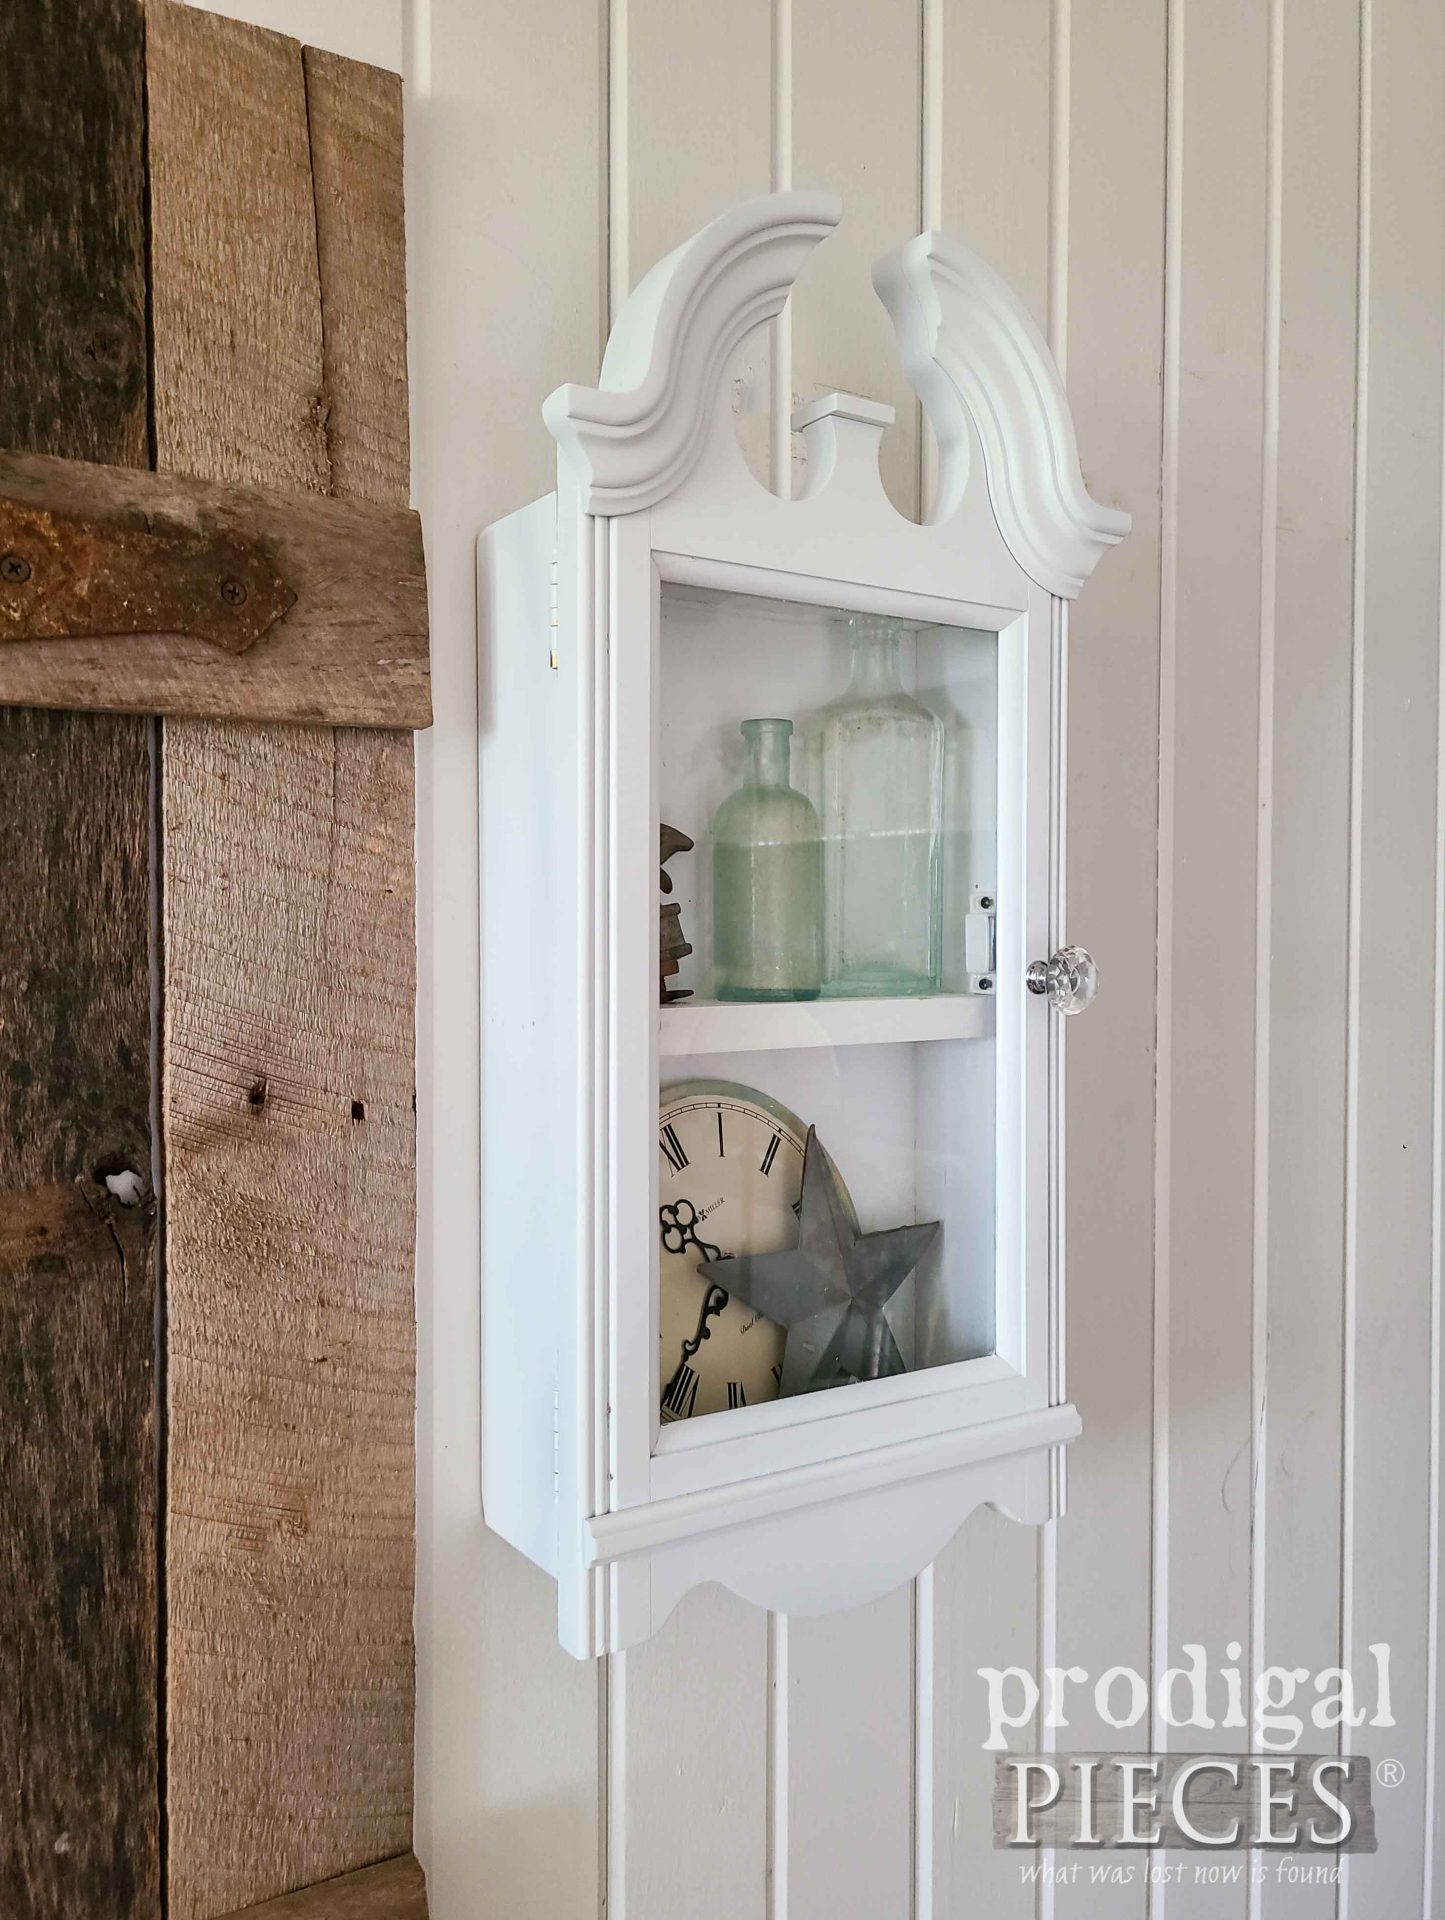 White Vintage Cabinet from Upcycled Wall Clock by Larissa of Prodigal Pieces | prodigalpieces.com #prodigalpieces #farmhouse #shabbychic